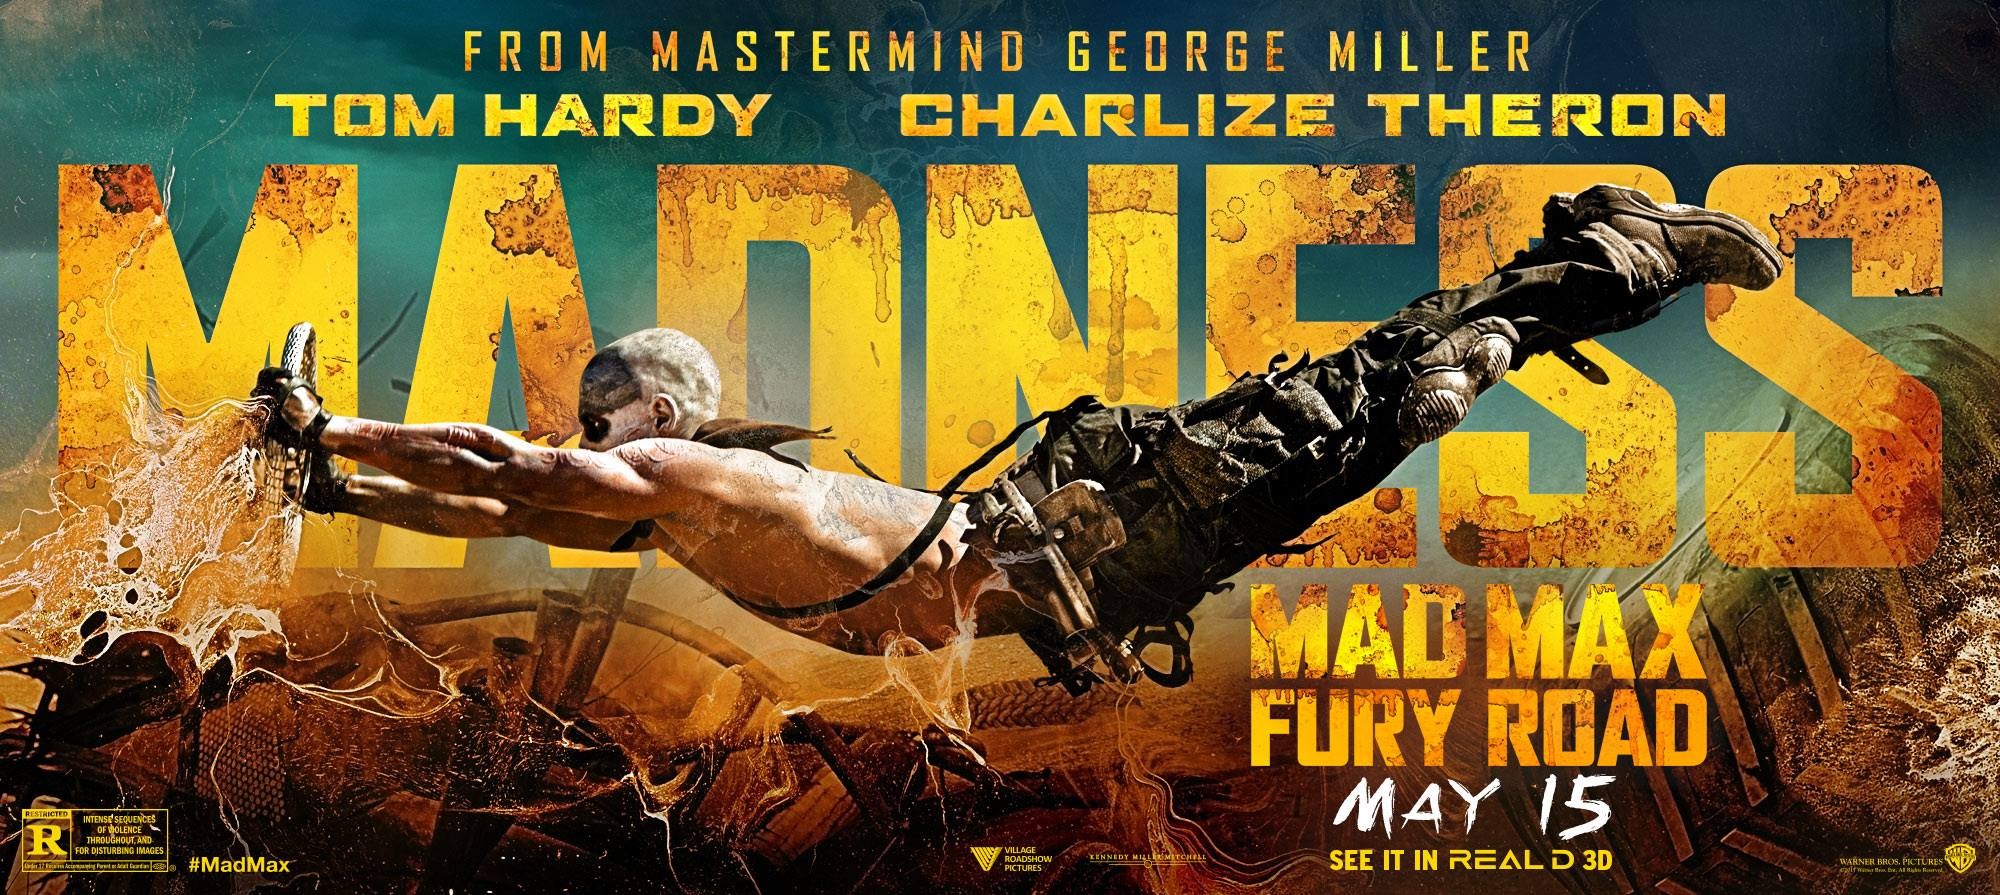 Mega Sized Movie Poster Image for Mad Max: Fury Road (#9 of 17)